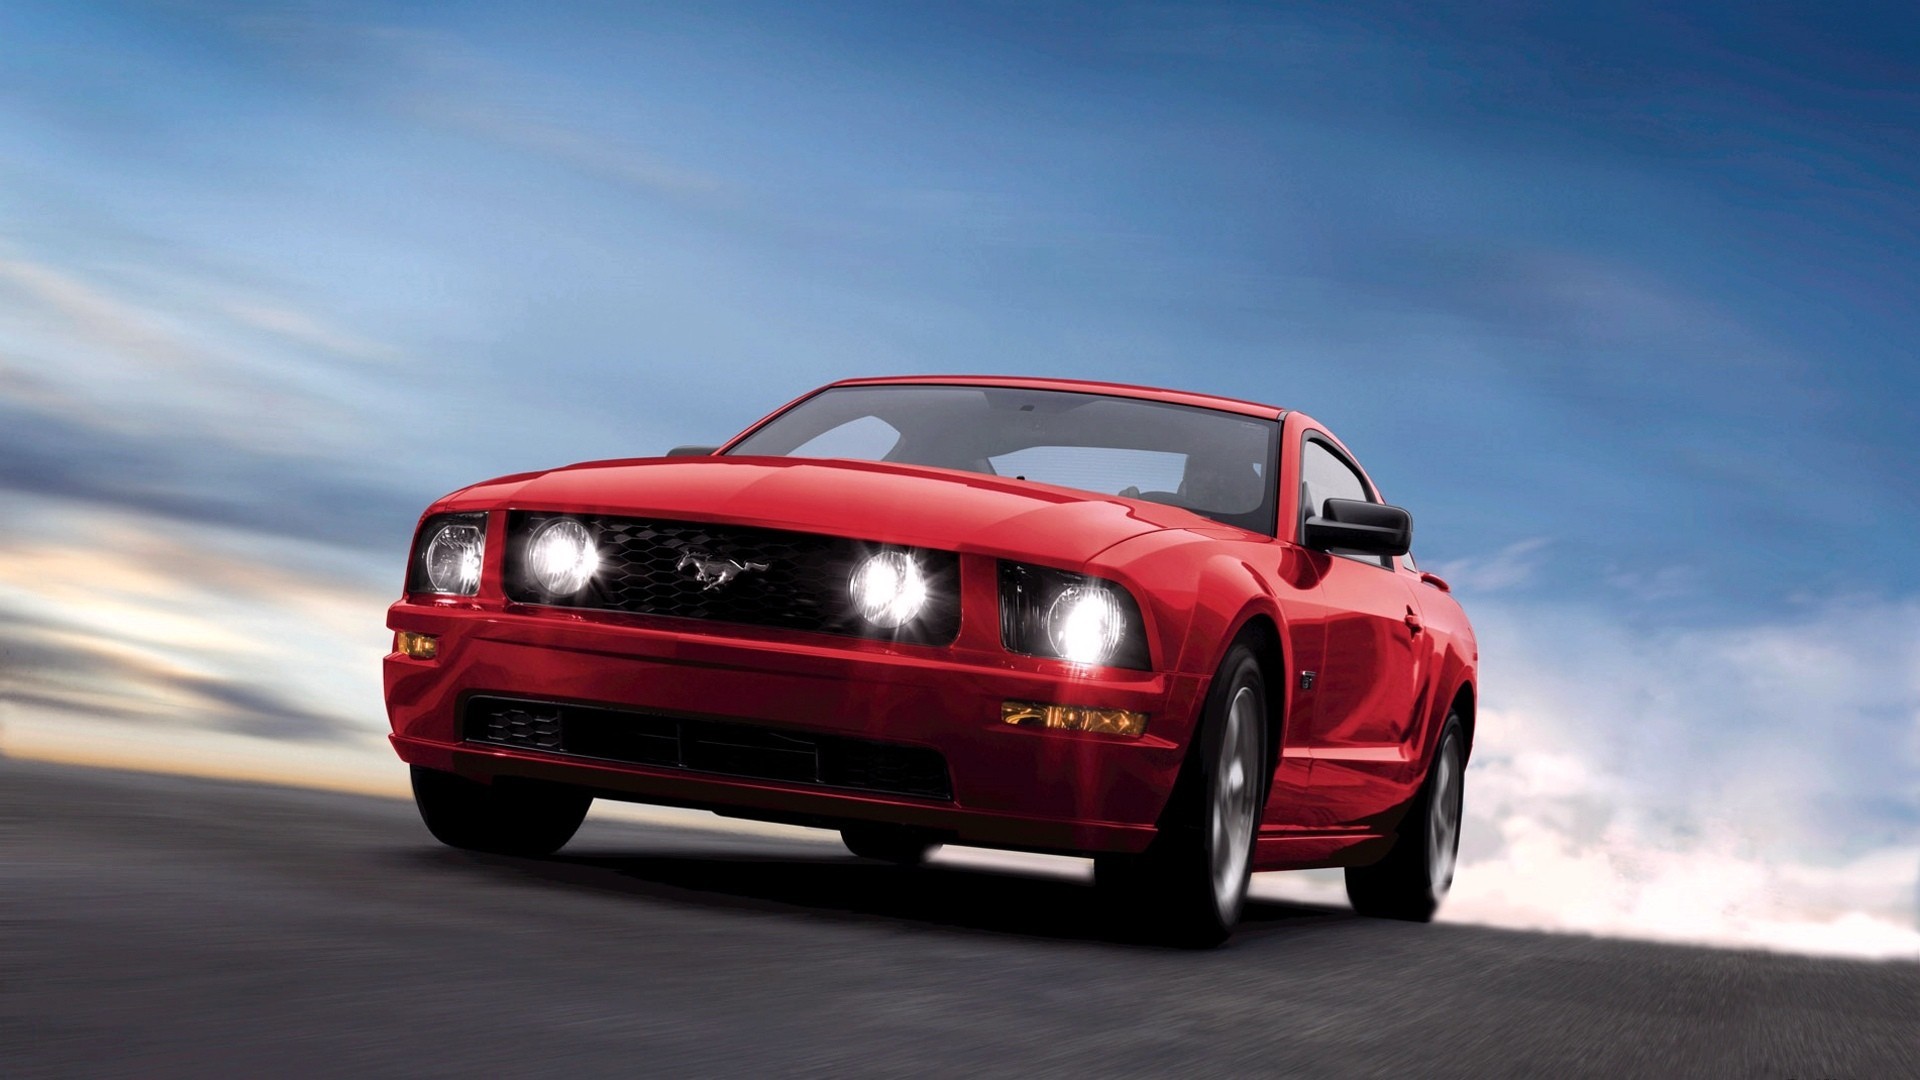 Ford Mustang, Muscle Cars, Red Cars Wallpaper